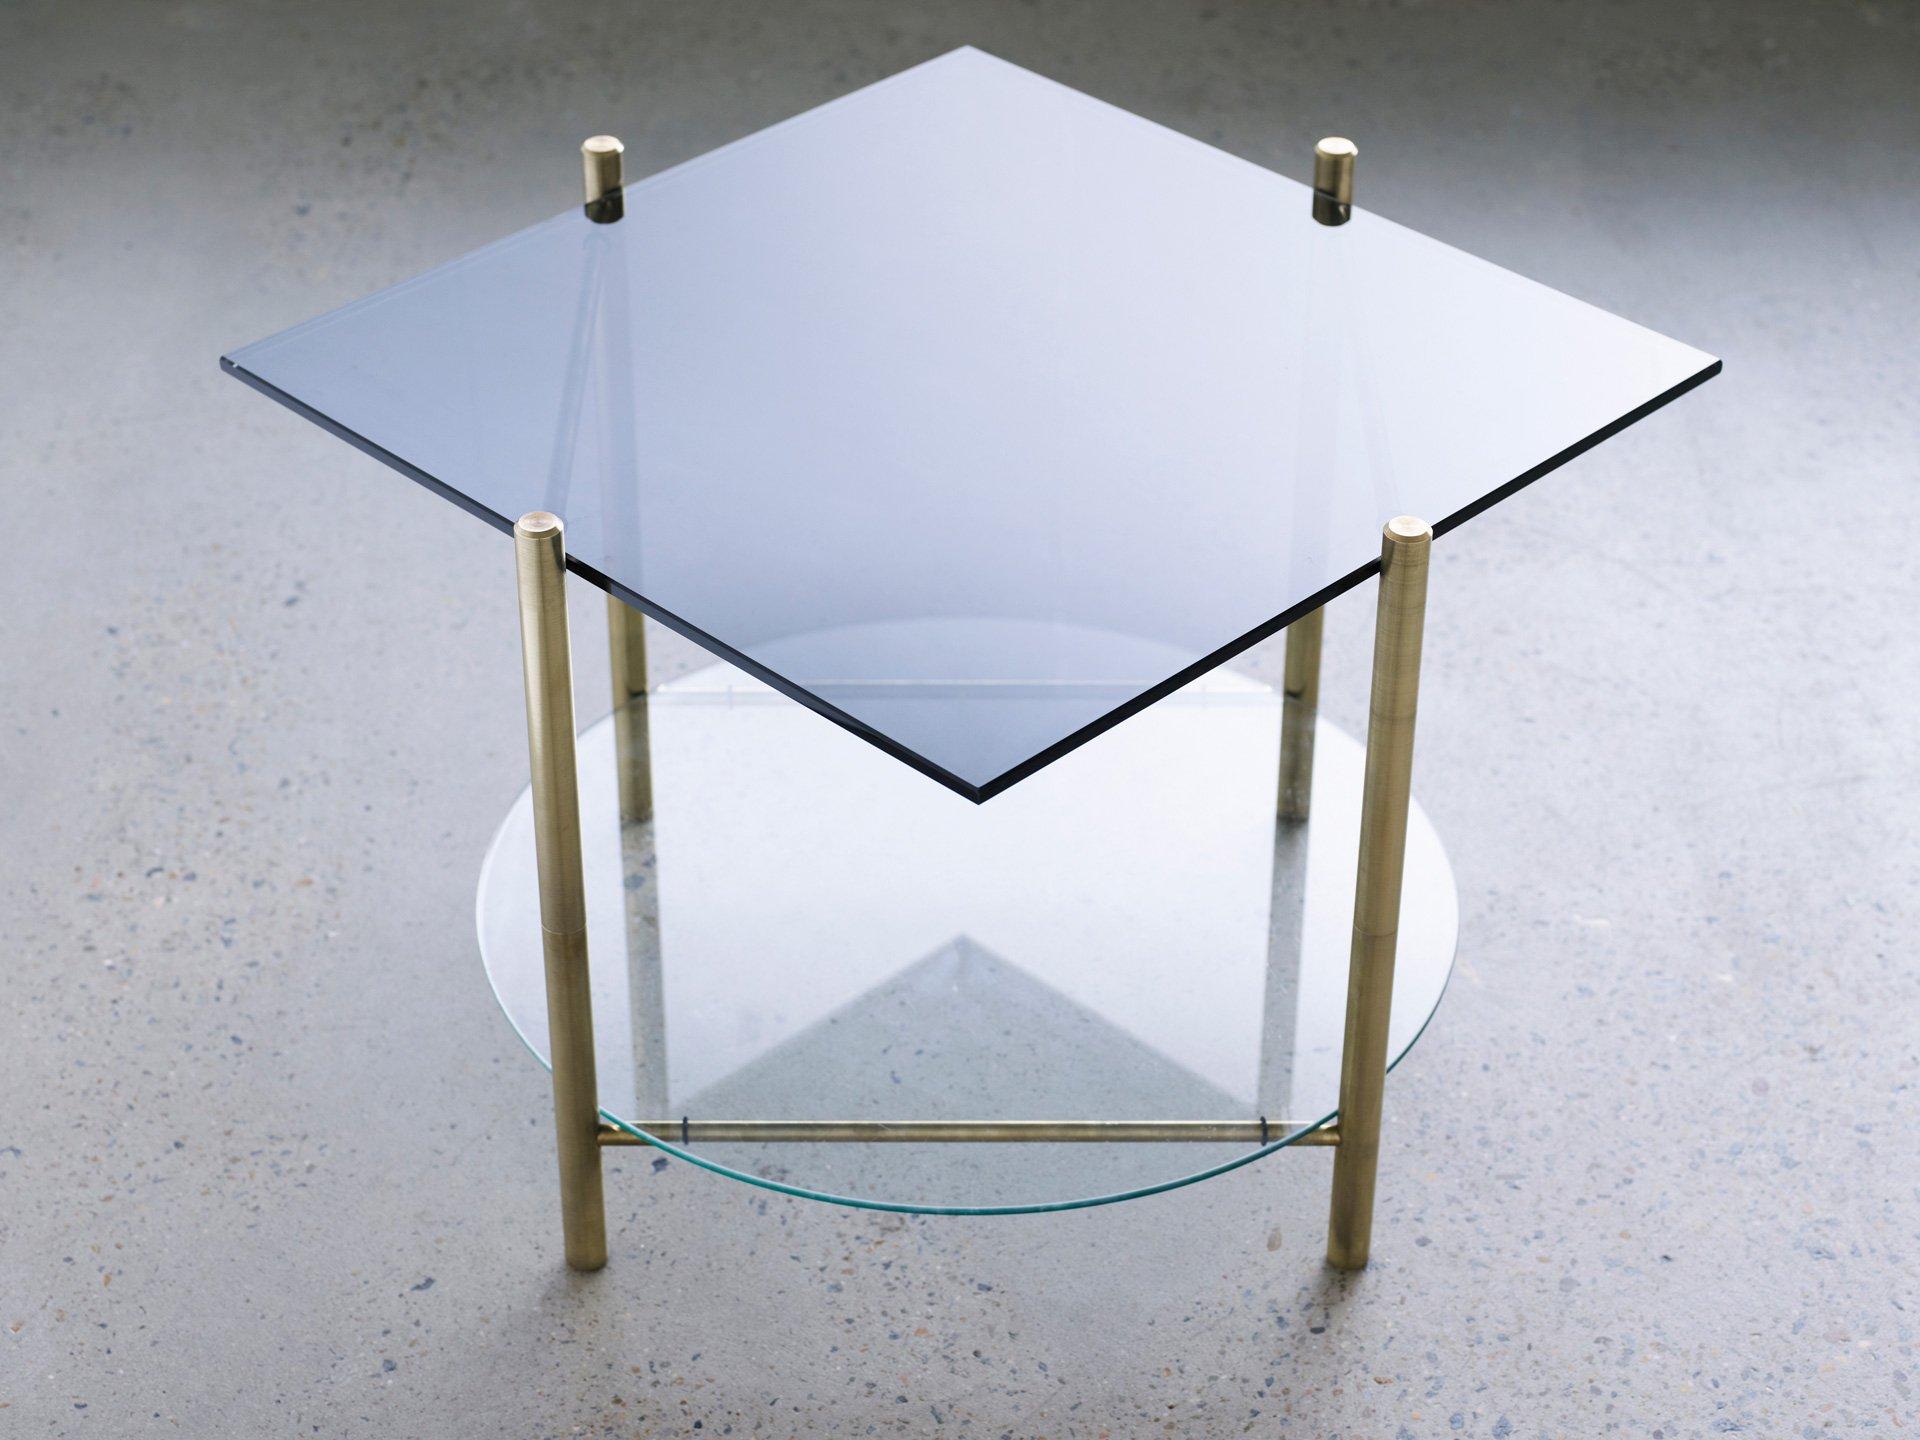 Coffee table by Henry Wilson
Square table/Round table

Solid brass frame with two tiered surfaces. All the tables are made to order in client specified materials. Some possibilities are; stone varieties, timbers, clear glass and coloured glass,